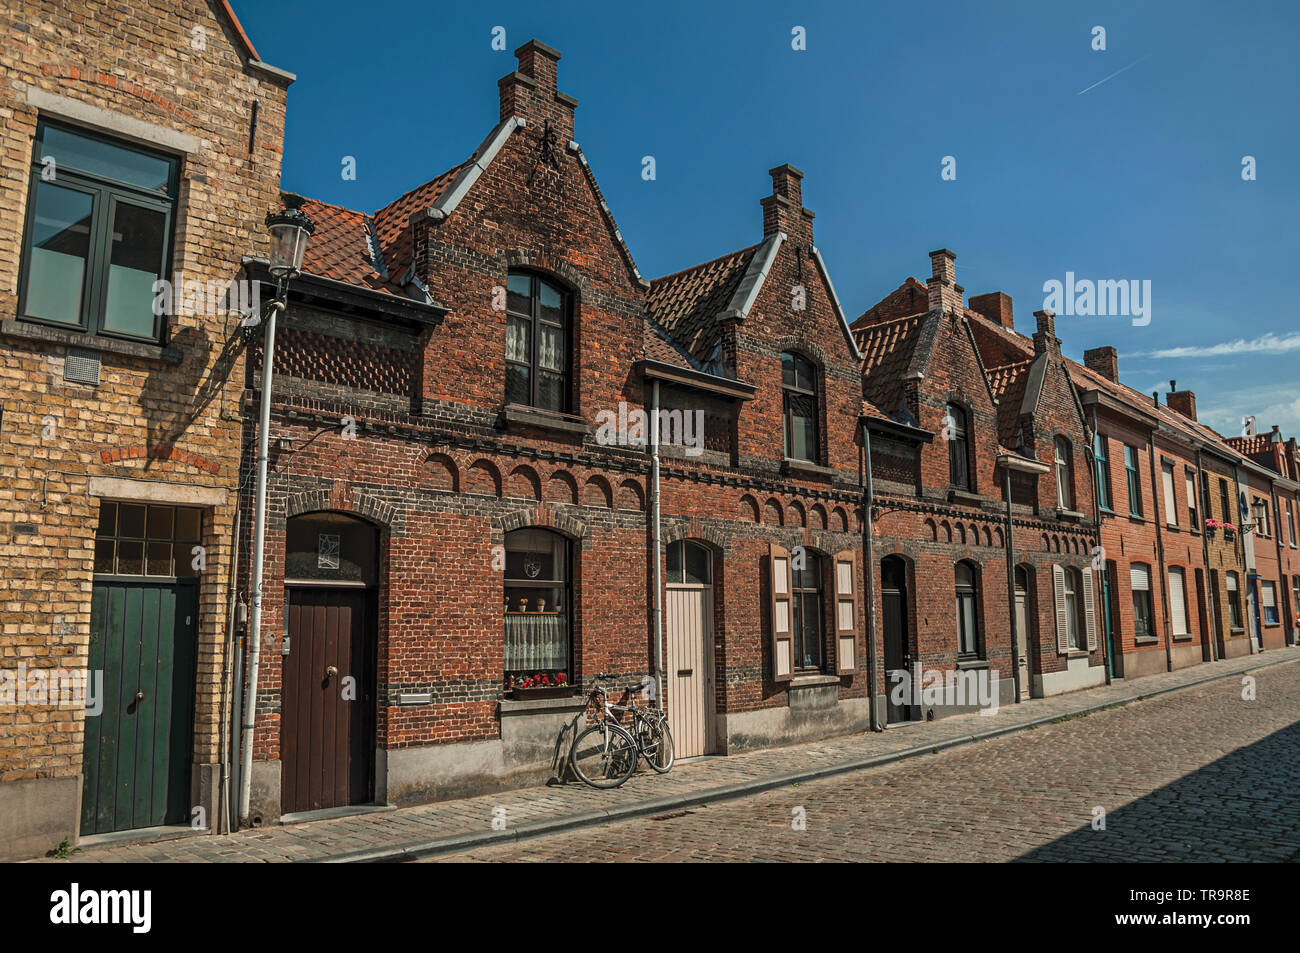 Brick facade of houses in typical Flanders style and bicycle, in street of Bruges. Charming town with canals and old buildings in Belgium. Stock Photo